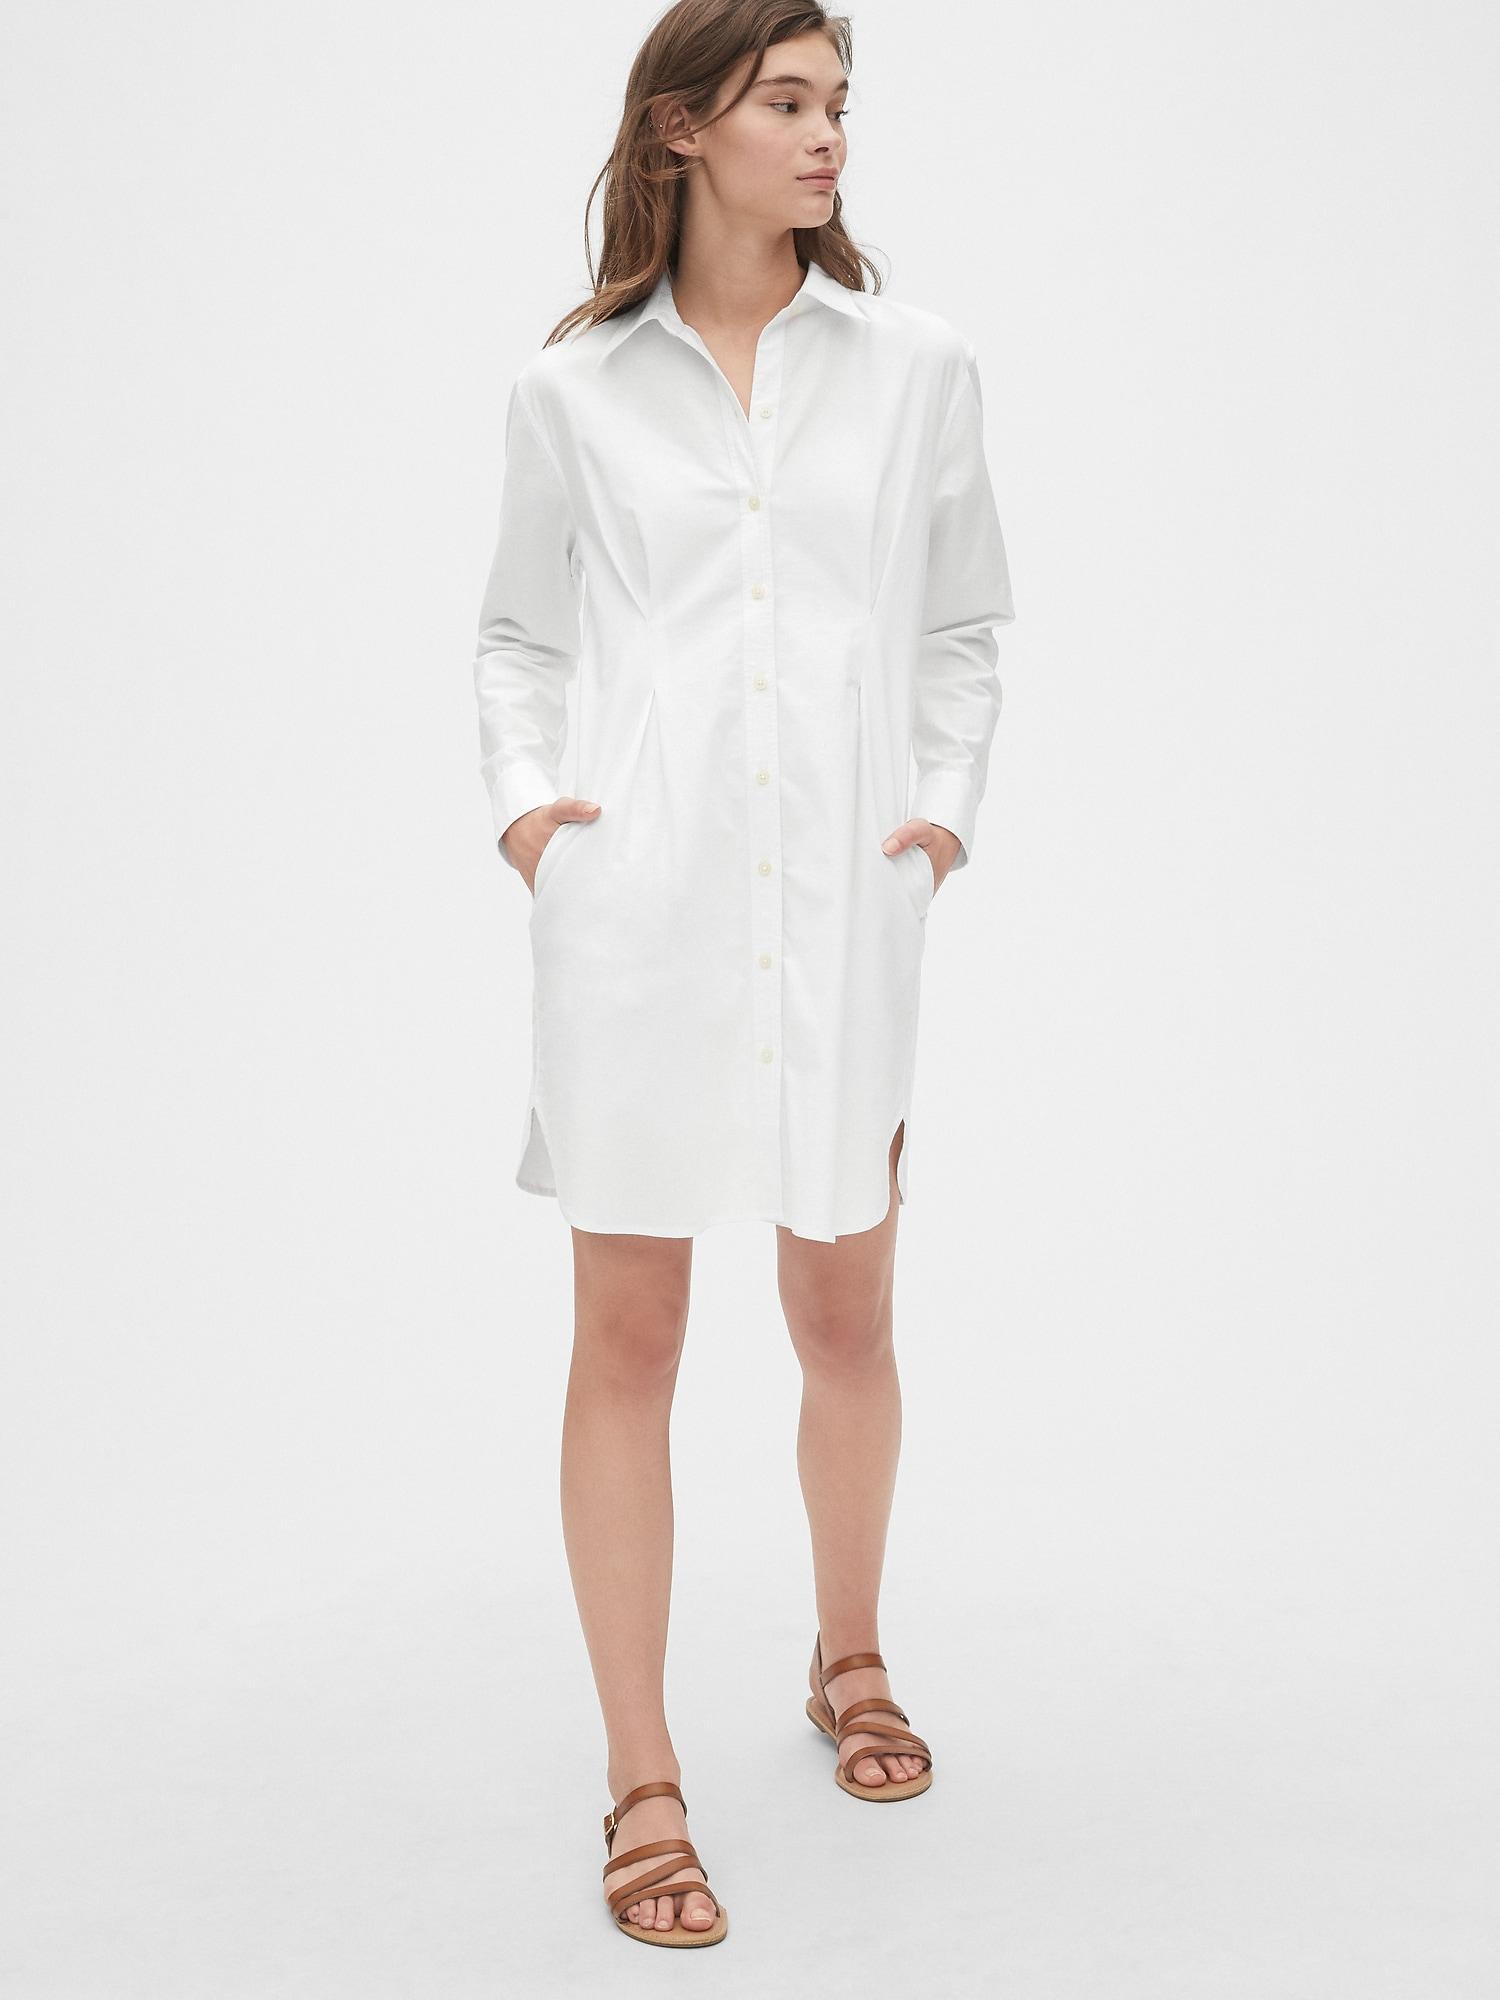 Gap Synthetic Pleated Oxford Shirtdress ...